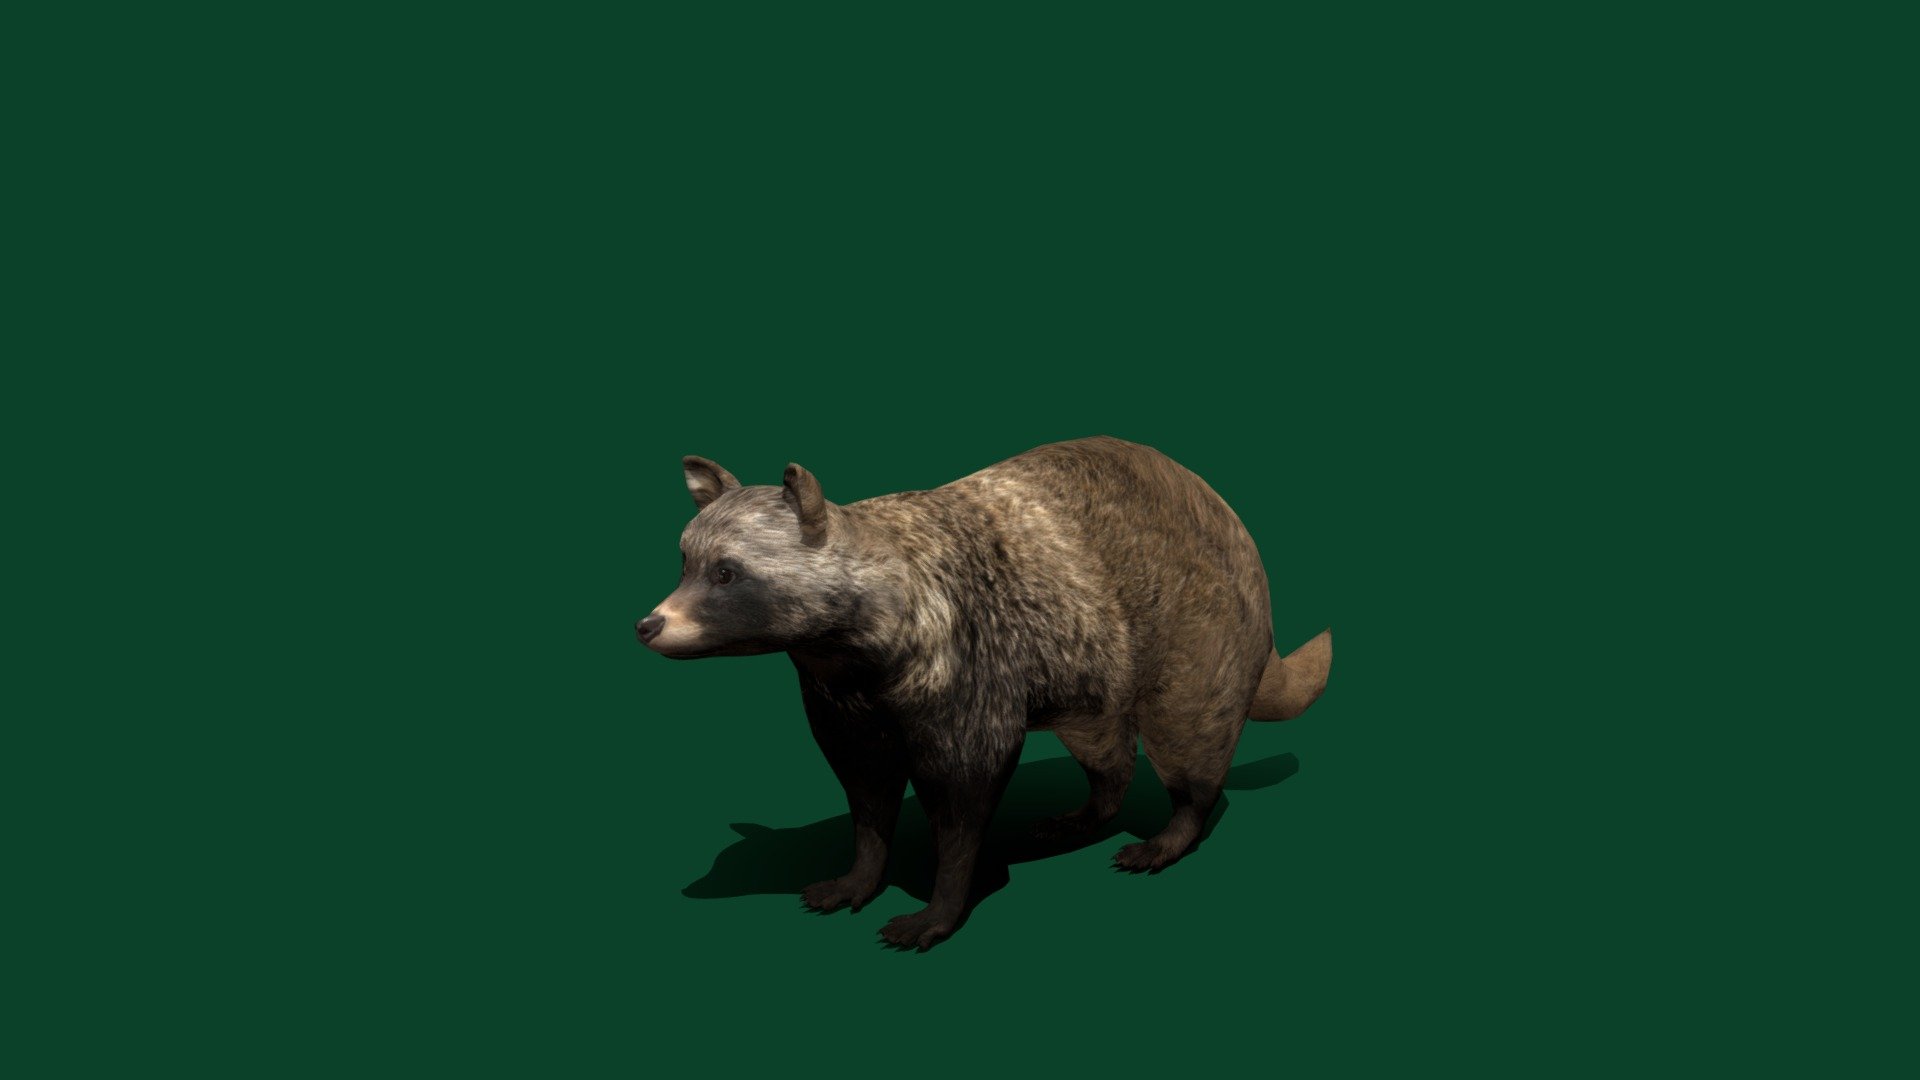 Common Raccoon dog(Chinese or Asian Raccoon dog )  fox-like canid 

Nyctereutes procyonoides Canidae Mammal ( small, heavy-set Carnivora )

1 Draw Calls

GameReady 

15 Animations

4K PBR Textures Material

Unreal FBX

Unity FBX  

Blend File 

USDZ File (AR Ready). Real Scale Dimension

Textures Files

GLB File

Gltf File ( Spark AR, Lens Studio(SnapChat) , Effector(Tiktok) , Spline, Play Canvas ) Compatible

Triangles : 8356

Vertices  : 4201

Faces     : 4210

Edges     : 8406

Diffuse , Metallic, Roughness , Normal Map ,Specular Map,AO,
 
The common raccoon dog, also called the Chinese or Asian raccoon dog to distinguish it from the Japanese raccoon dog, is a small, heavy-set, fox-like canid native to East Asia. Named for its raccoon-like face markings, it is most closely related to foxes. Wikipedia
Family: Canidae
Scientific name: Nyctereutes procyonoides - Common Raccoon Dog (Lowpoly) - Buy Royalty Free 3D model by Nyilonelycompany 3d model